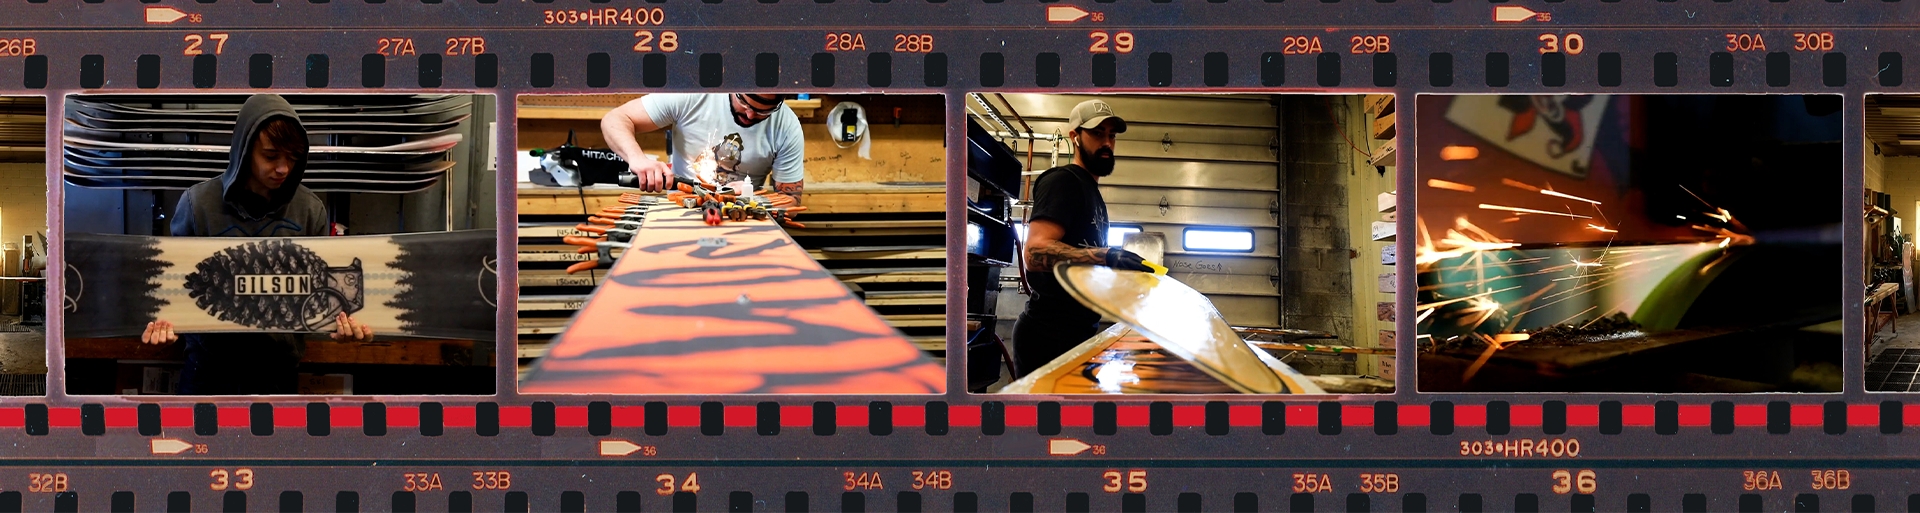 manufacturing photos appearing on a roll of film